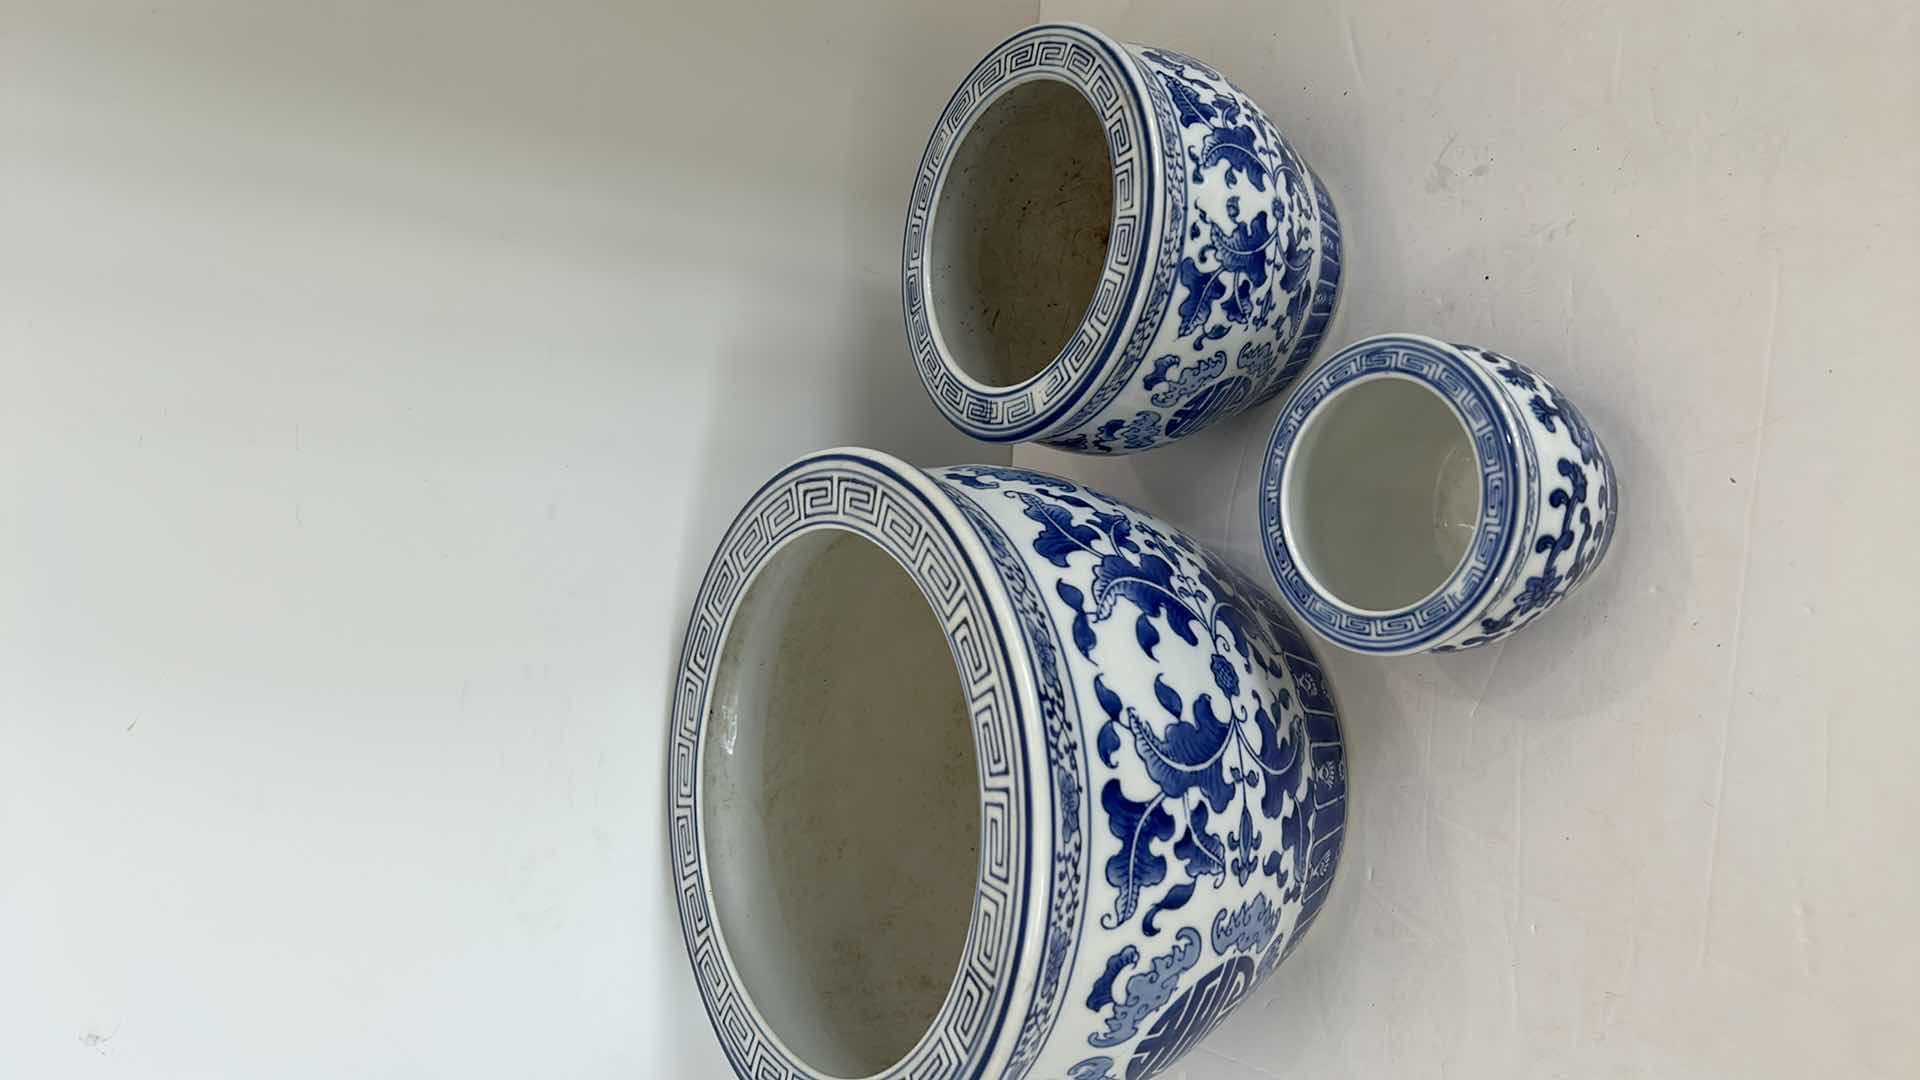 Photo 2 of 3 PIECE CERAMIC POTTERY LARGEST is 9 1/2” x 7 1/2”